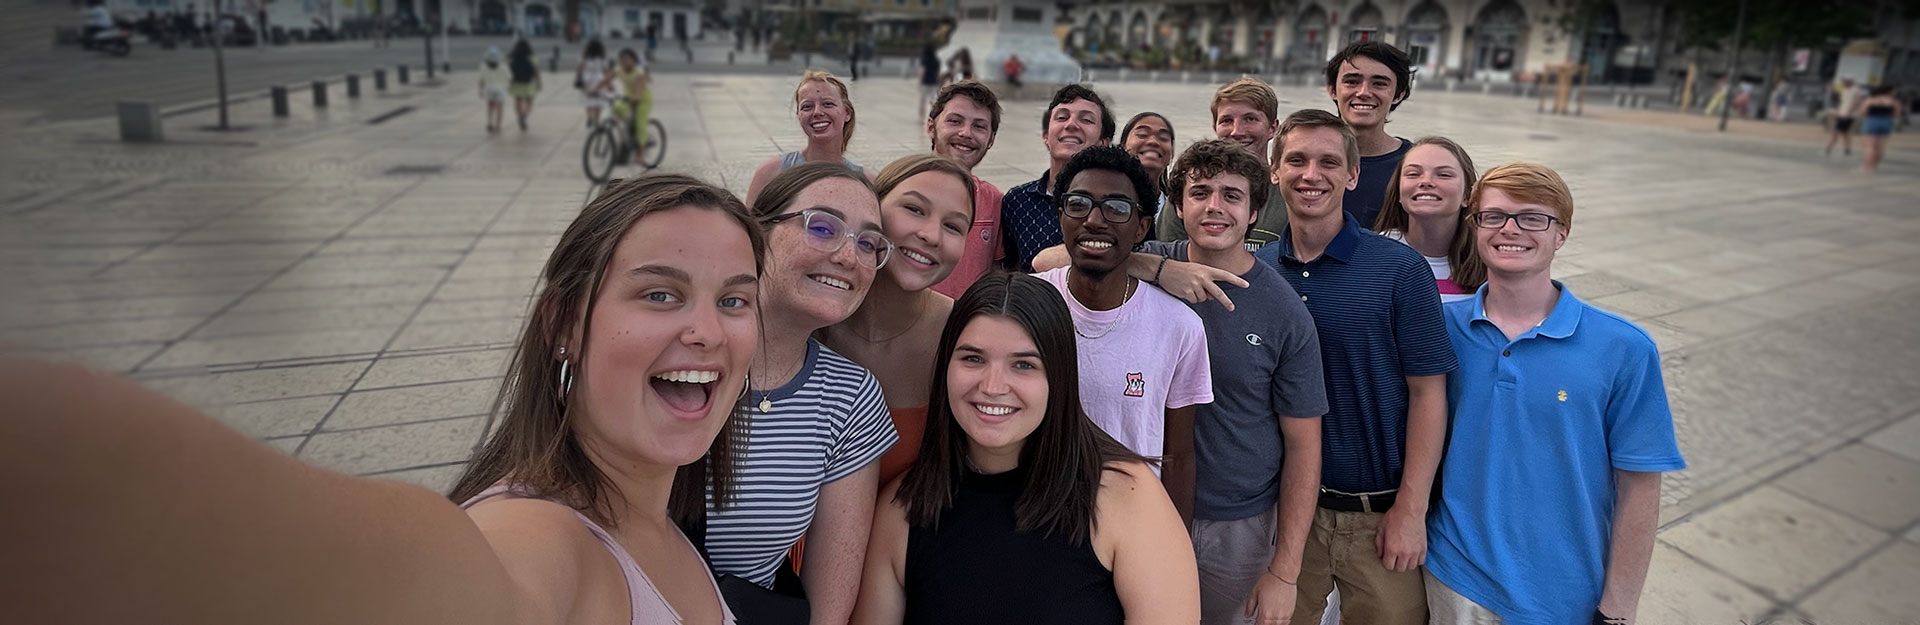 Students in Place de Jaude in France.